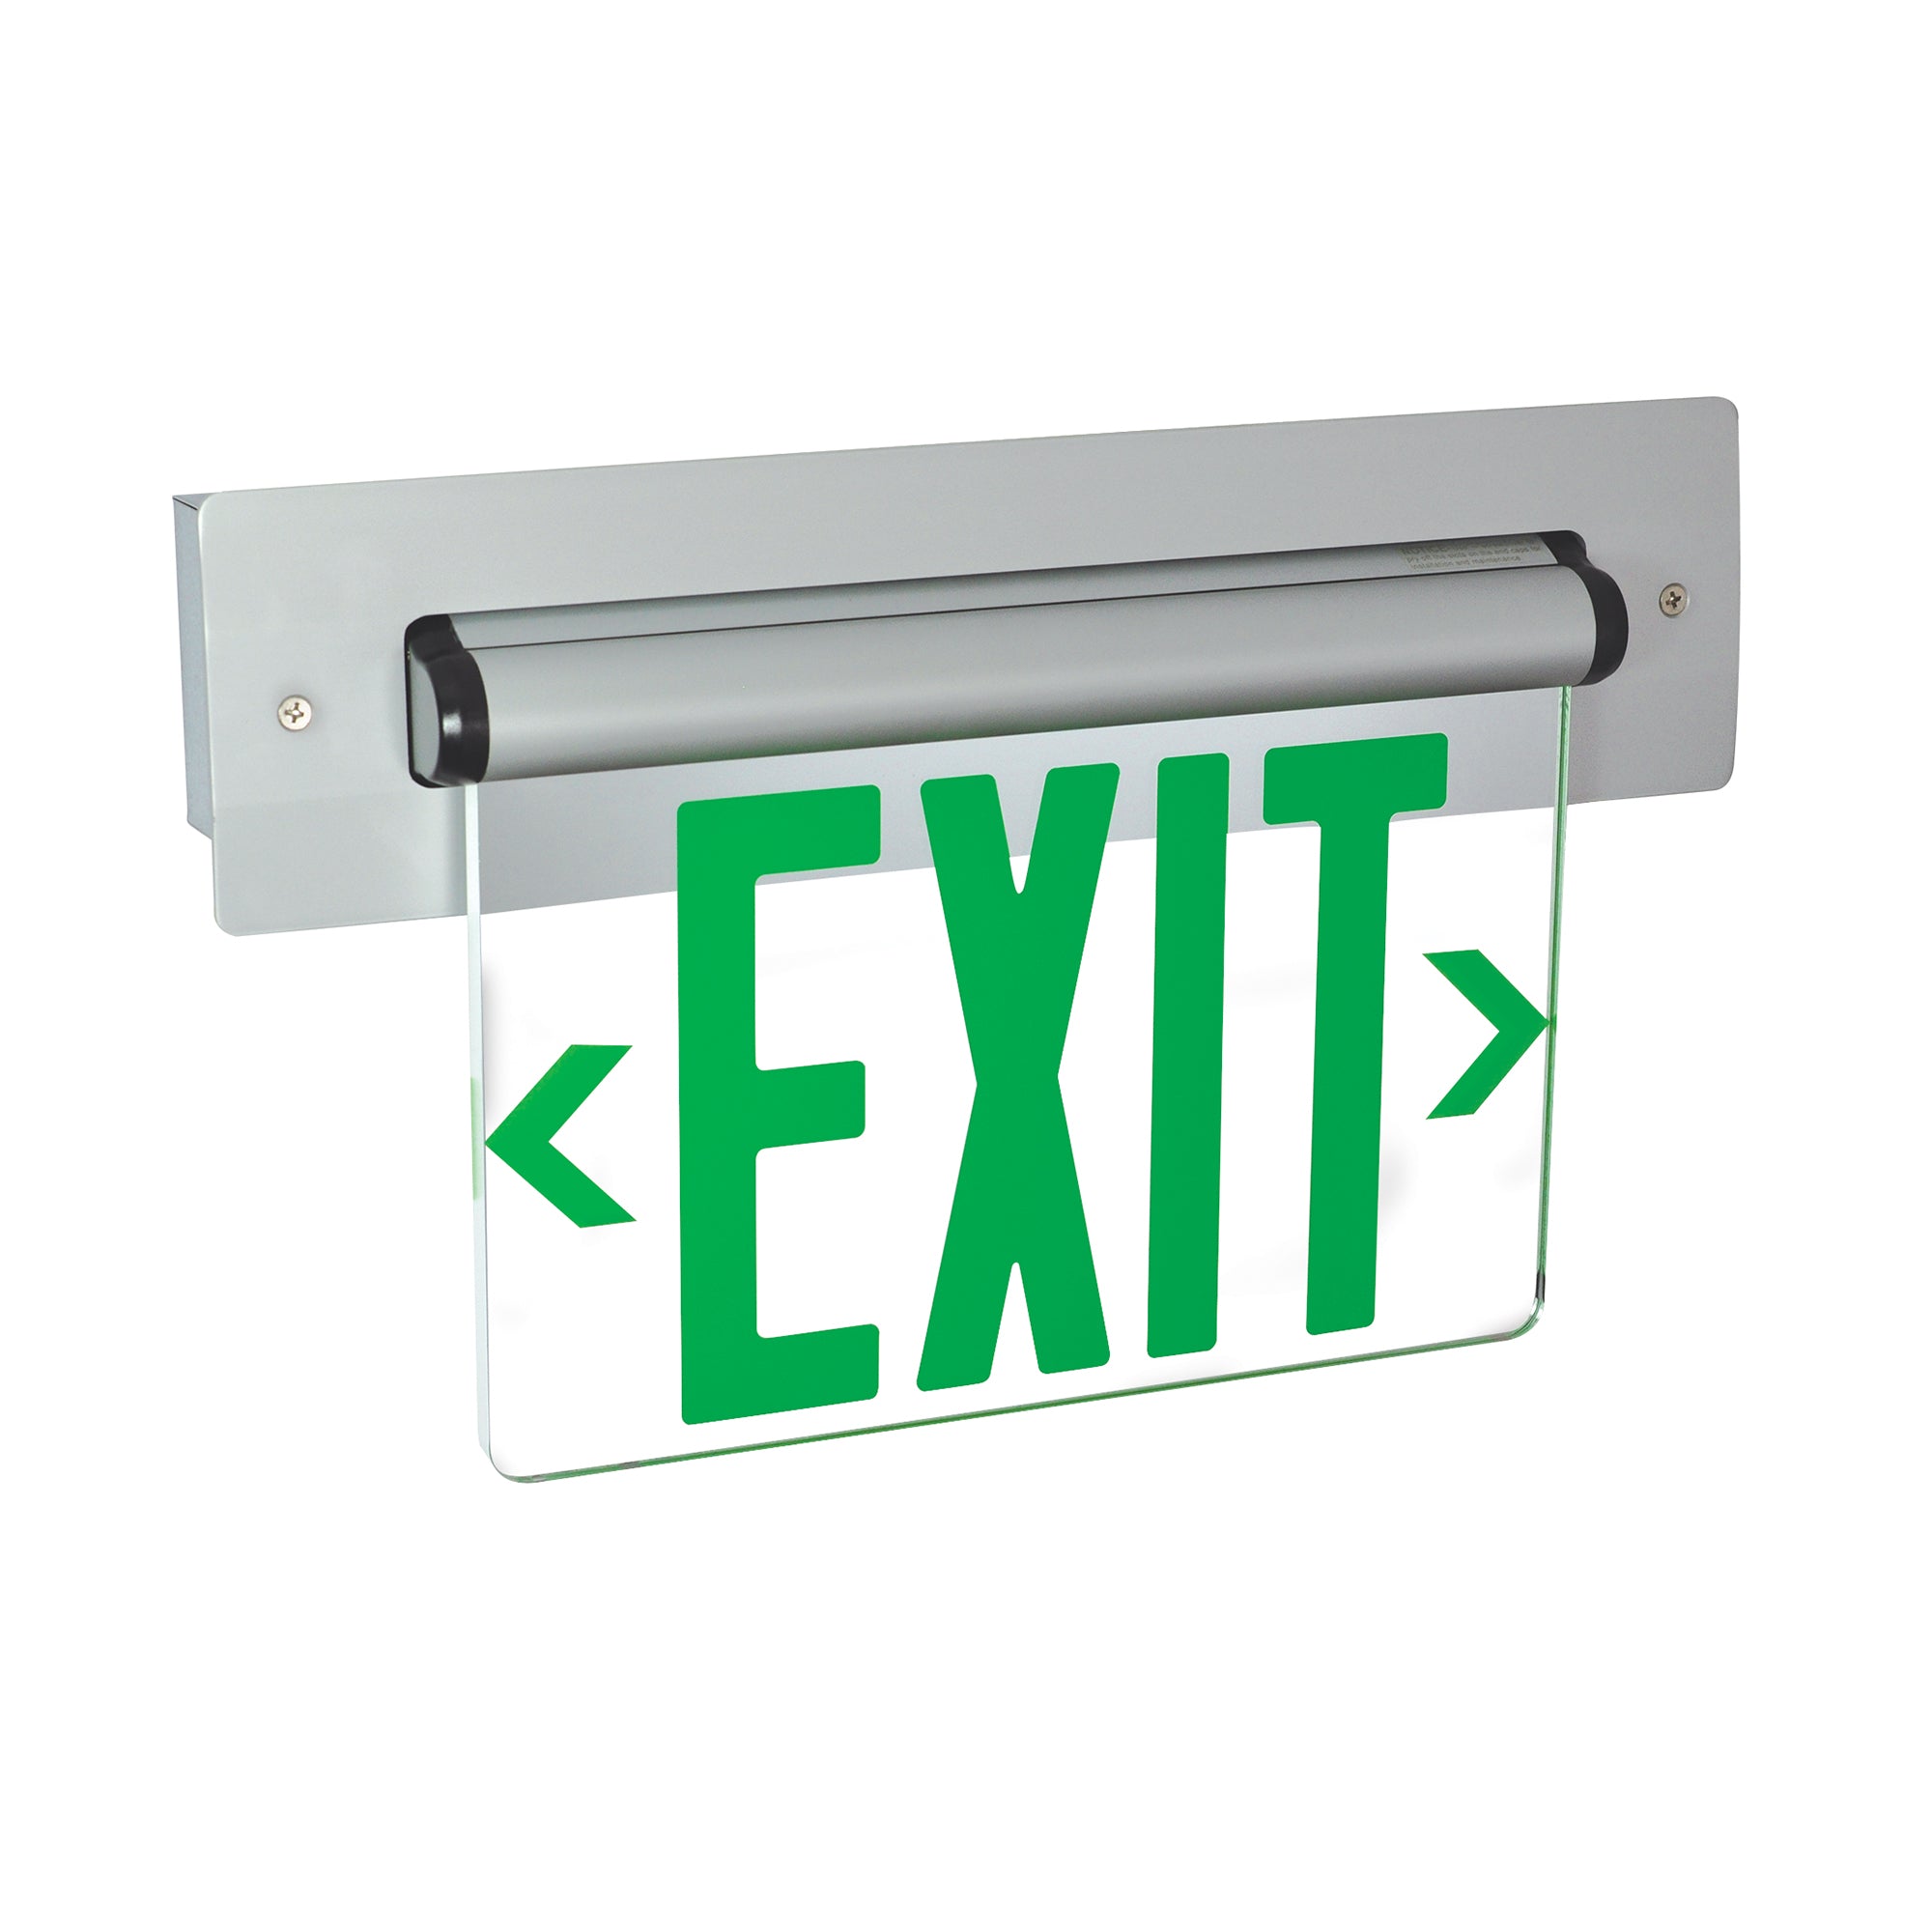 Nora Lighting NX-813-LEDGCW - Exit / Emergency - Recessed Adjustable LED Edge-Lit Exit Sign, AC Only, 6 Inch Green Letters, Single Face / Clear Acrylic, White Housing